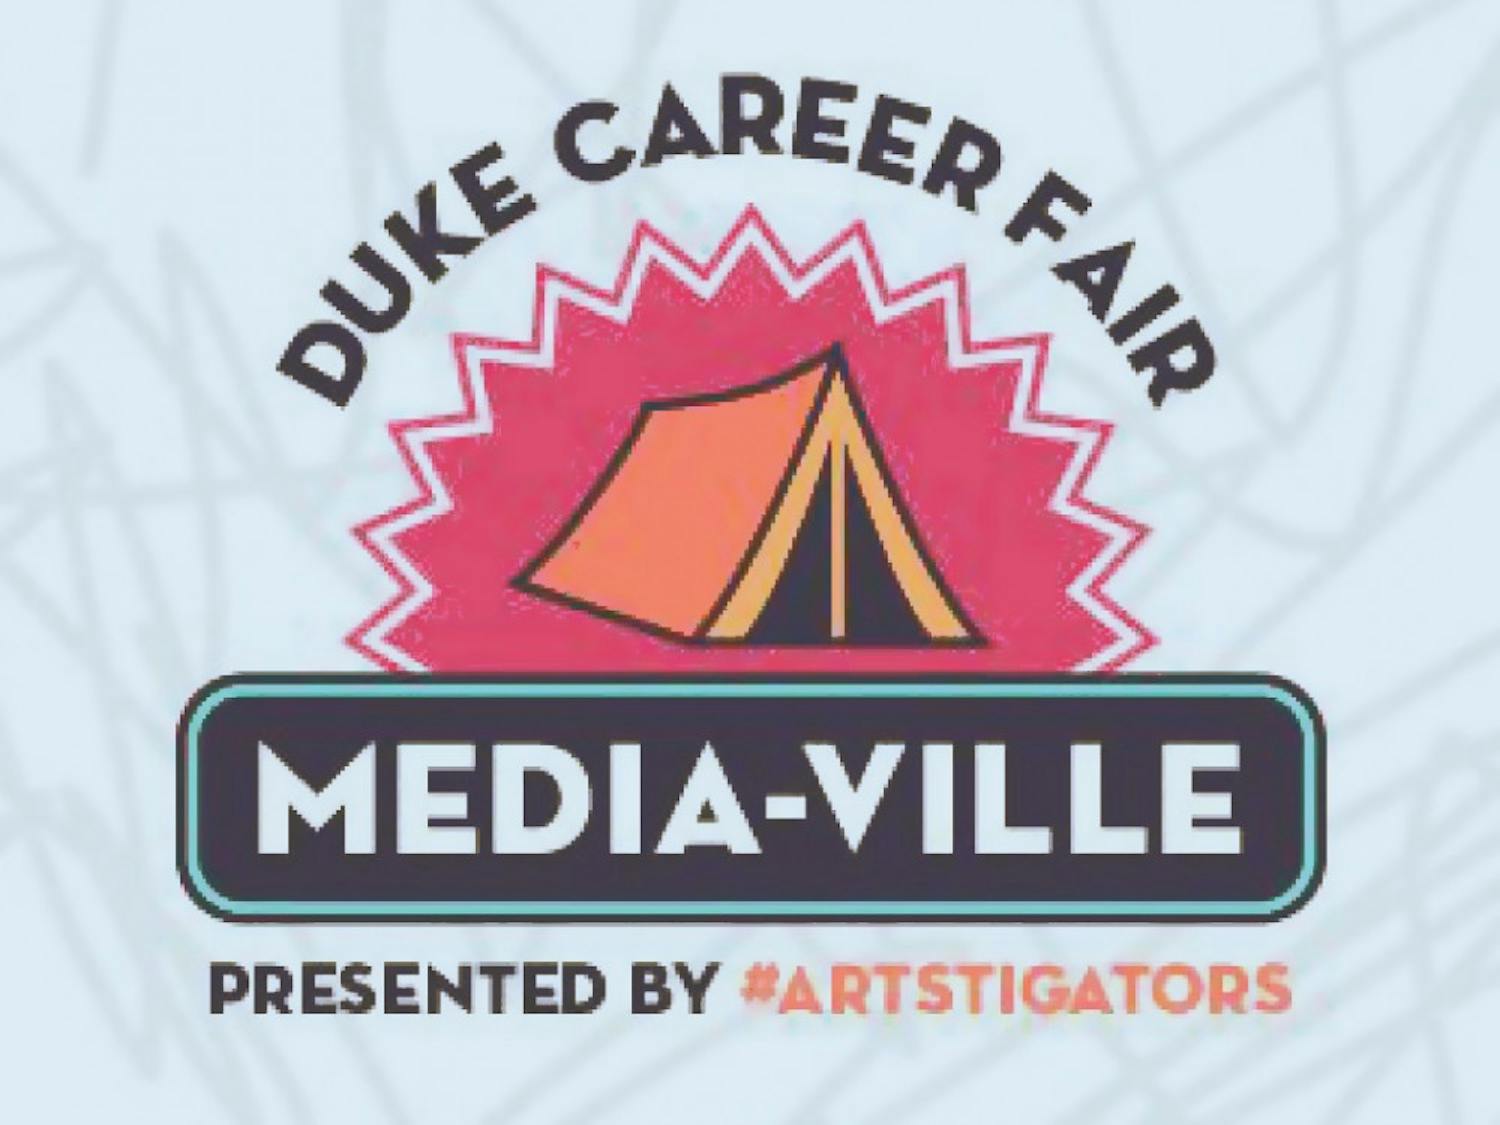 Duke's annual Fall Career Fair, which takes place Sept. 25, will feature Media-Ville, a fast-paced way to survey arts career options.